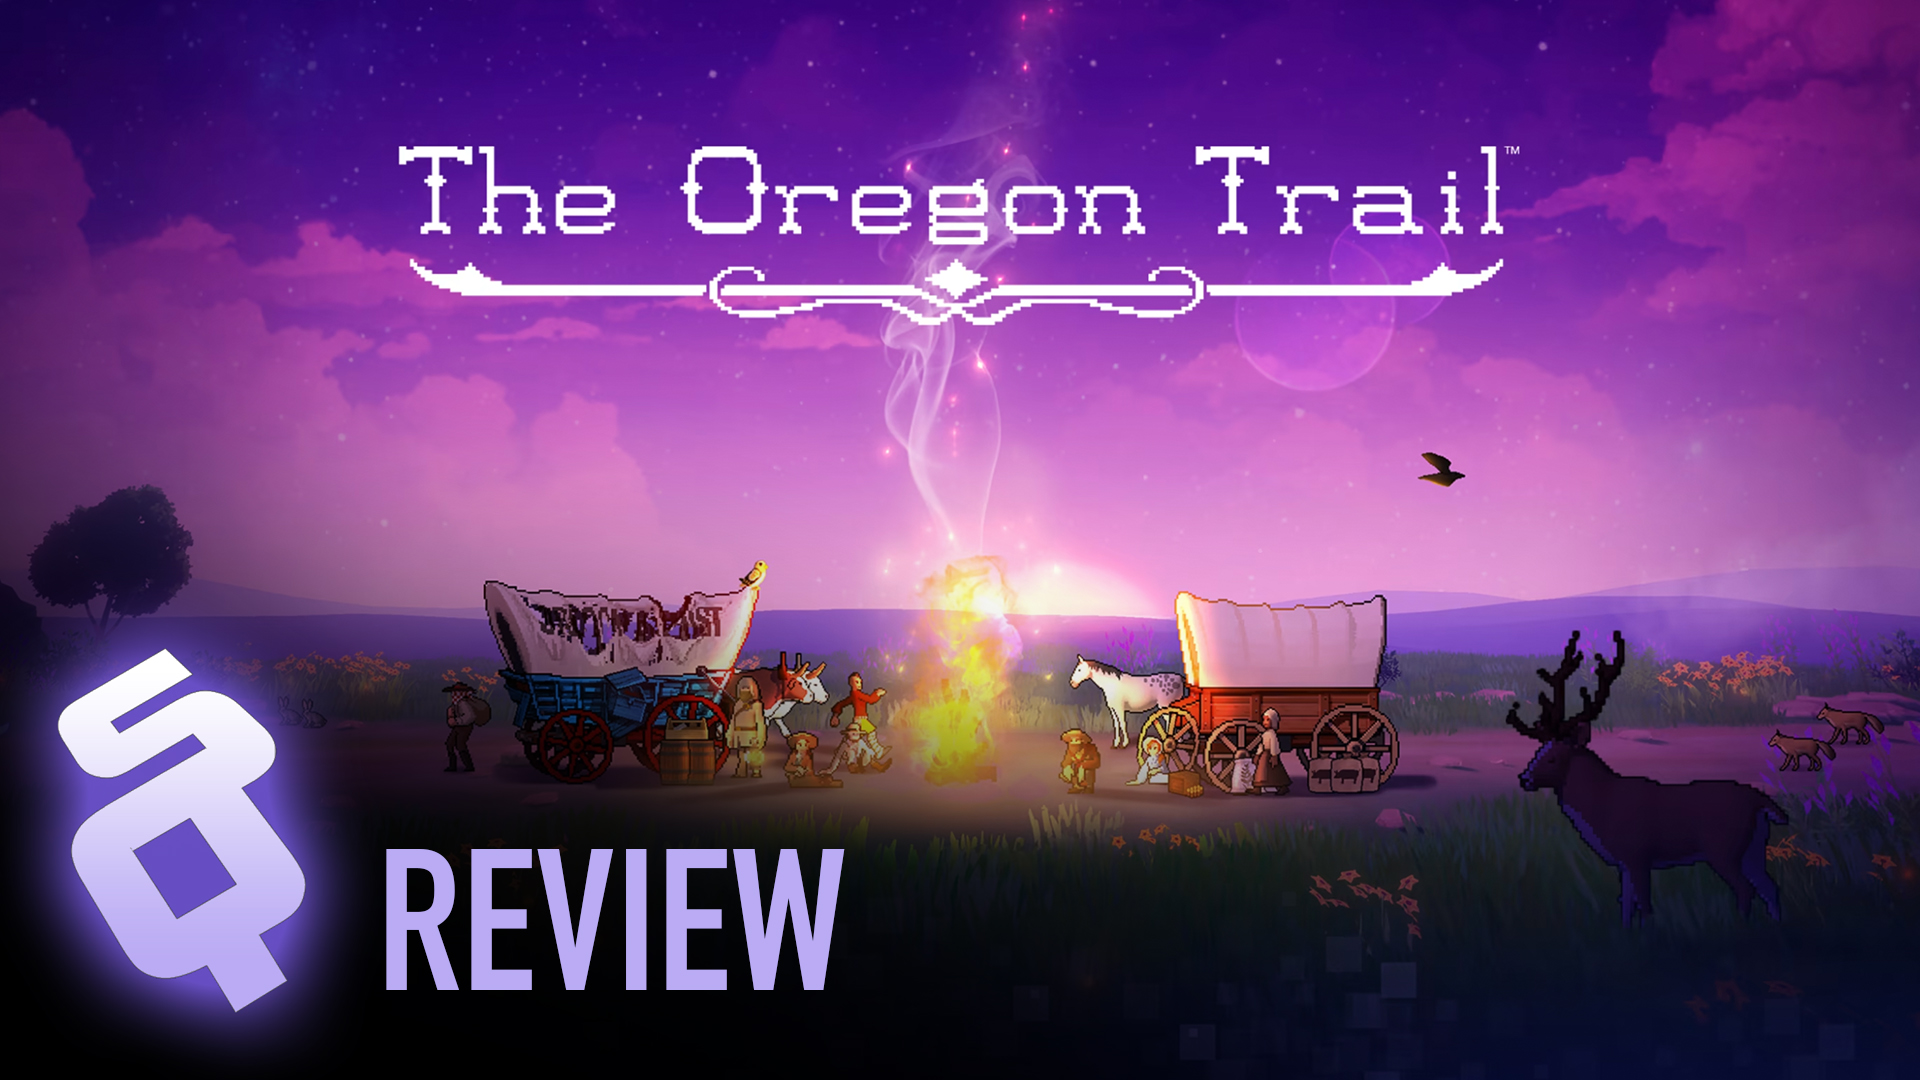 The Oregon Trail review